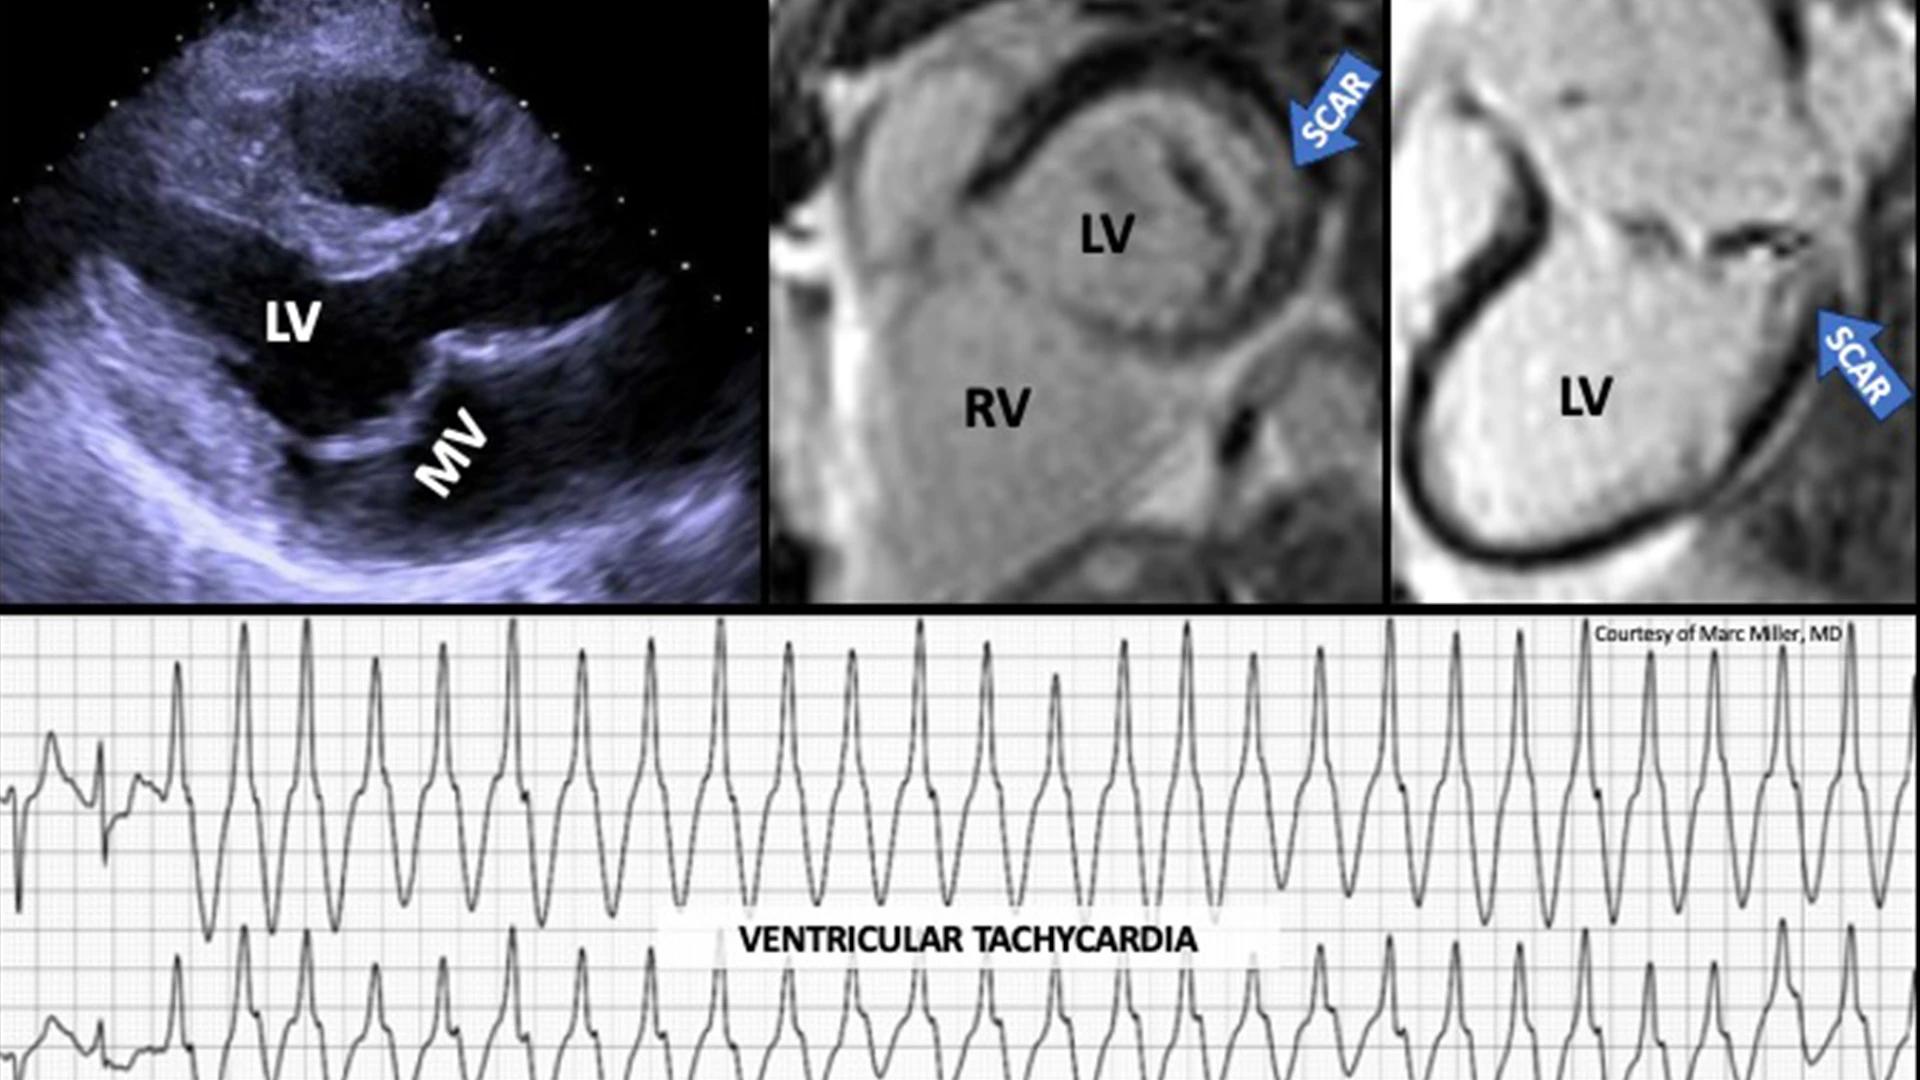 Images were obtained from a man in his mid-50s with asymptomatic degenerative mitral valve prolapse (bi-leaflet) with mild-moderate mitral regurgitation, who had an episode of syncope without prodrome. A subsequent ambulatory ECG monitor was notable for frequent salvos of ventricular tachycardia. Cardiac MRI imaging demonstrated replacement fibrosis (scar) in the basal infero-lateral left ventricle. 